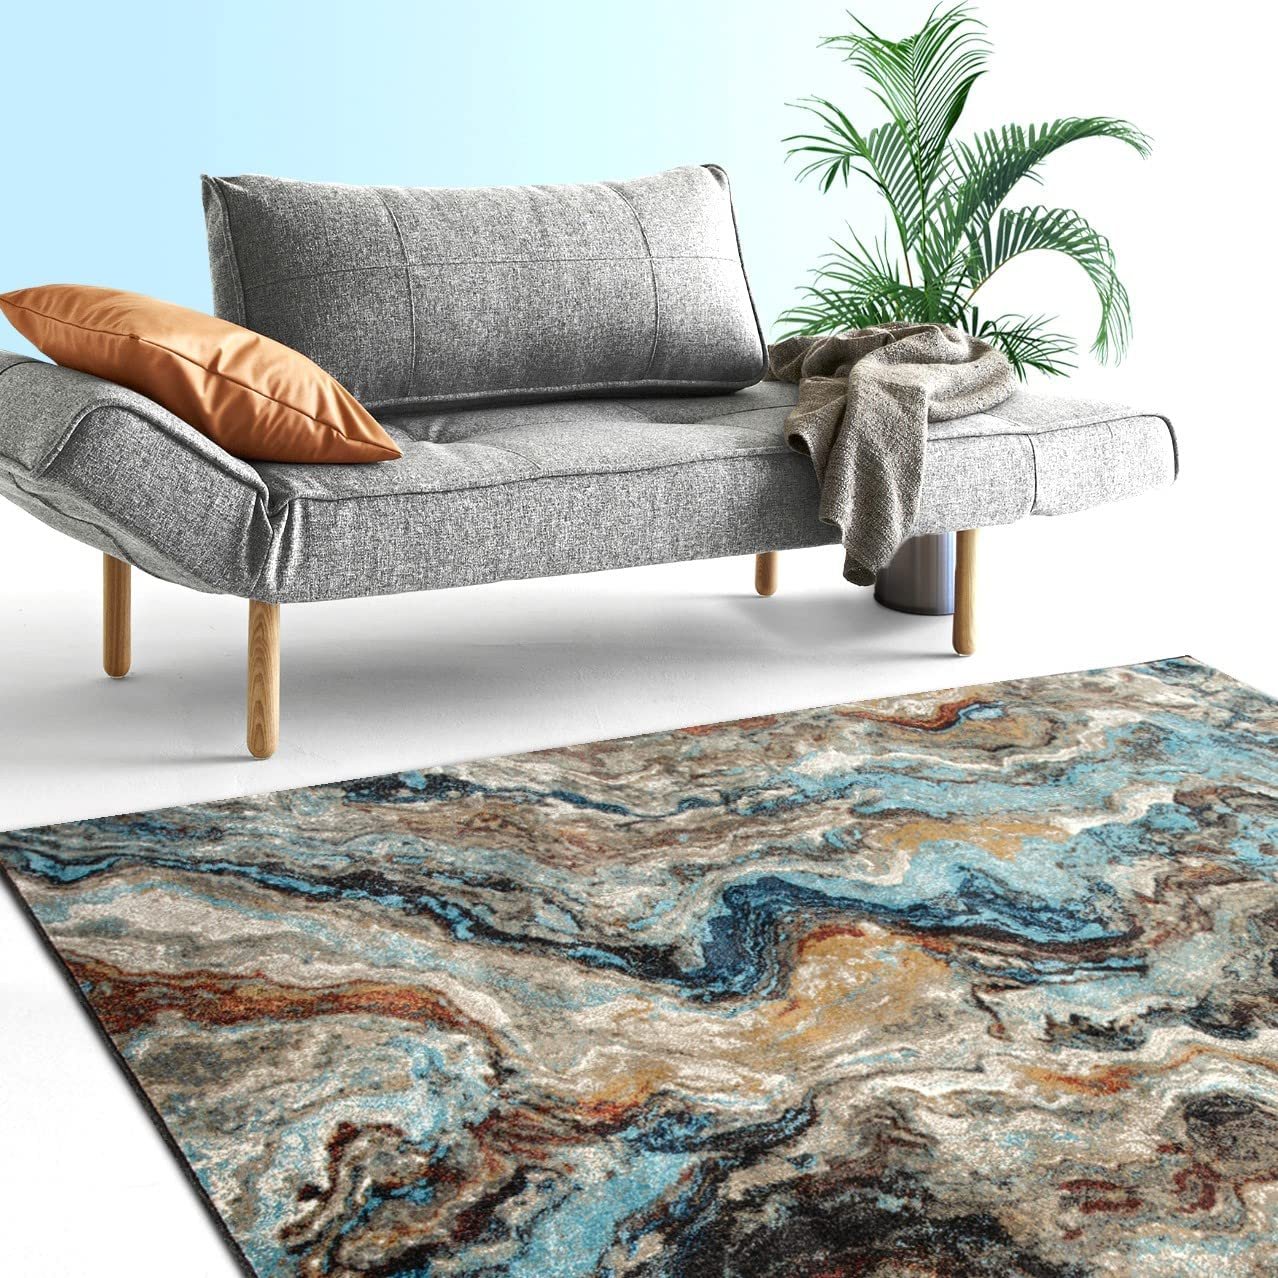 Marble Rugs Turquoise Burgundy # 90